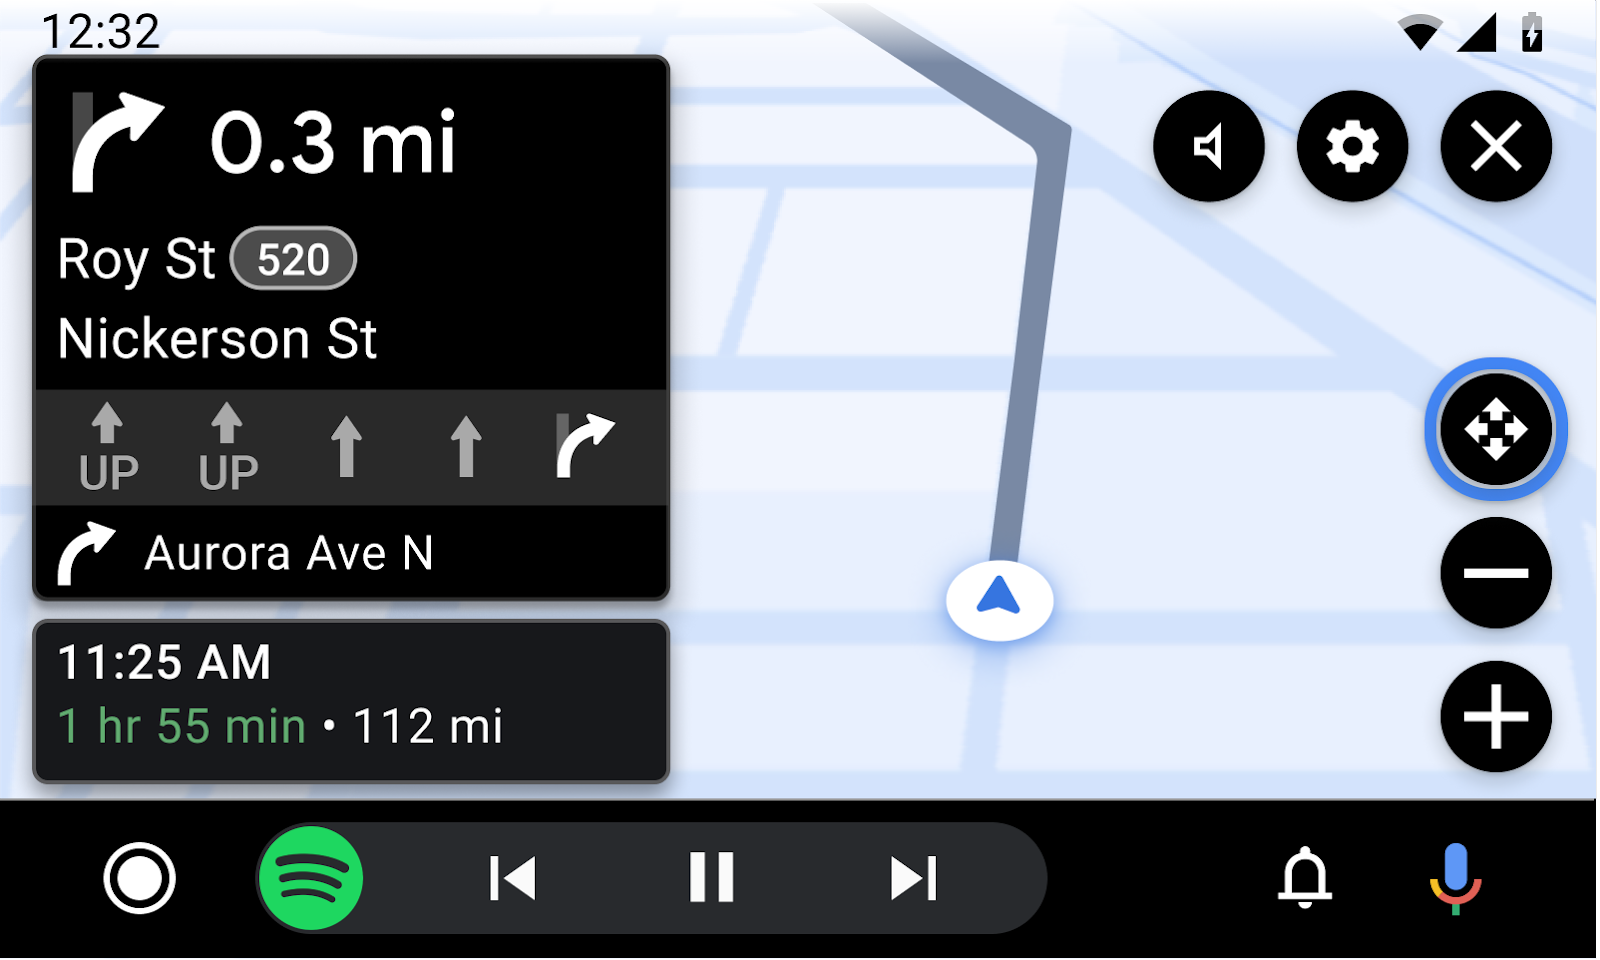 New navigation app with routing instructions